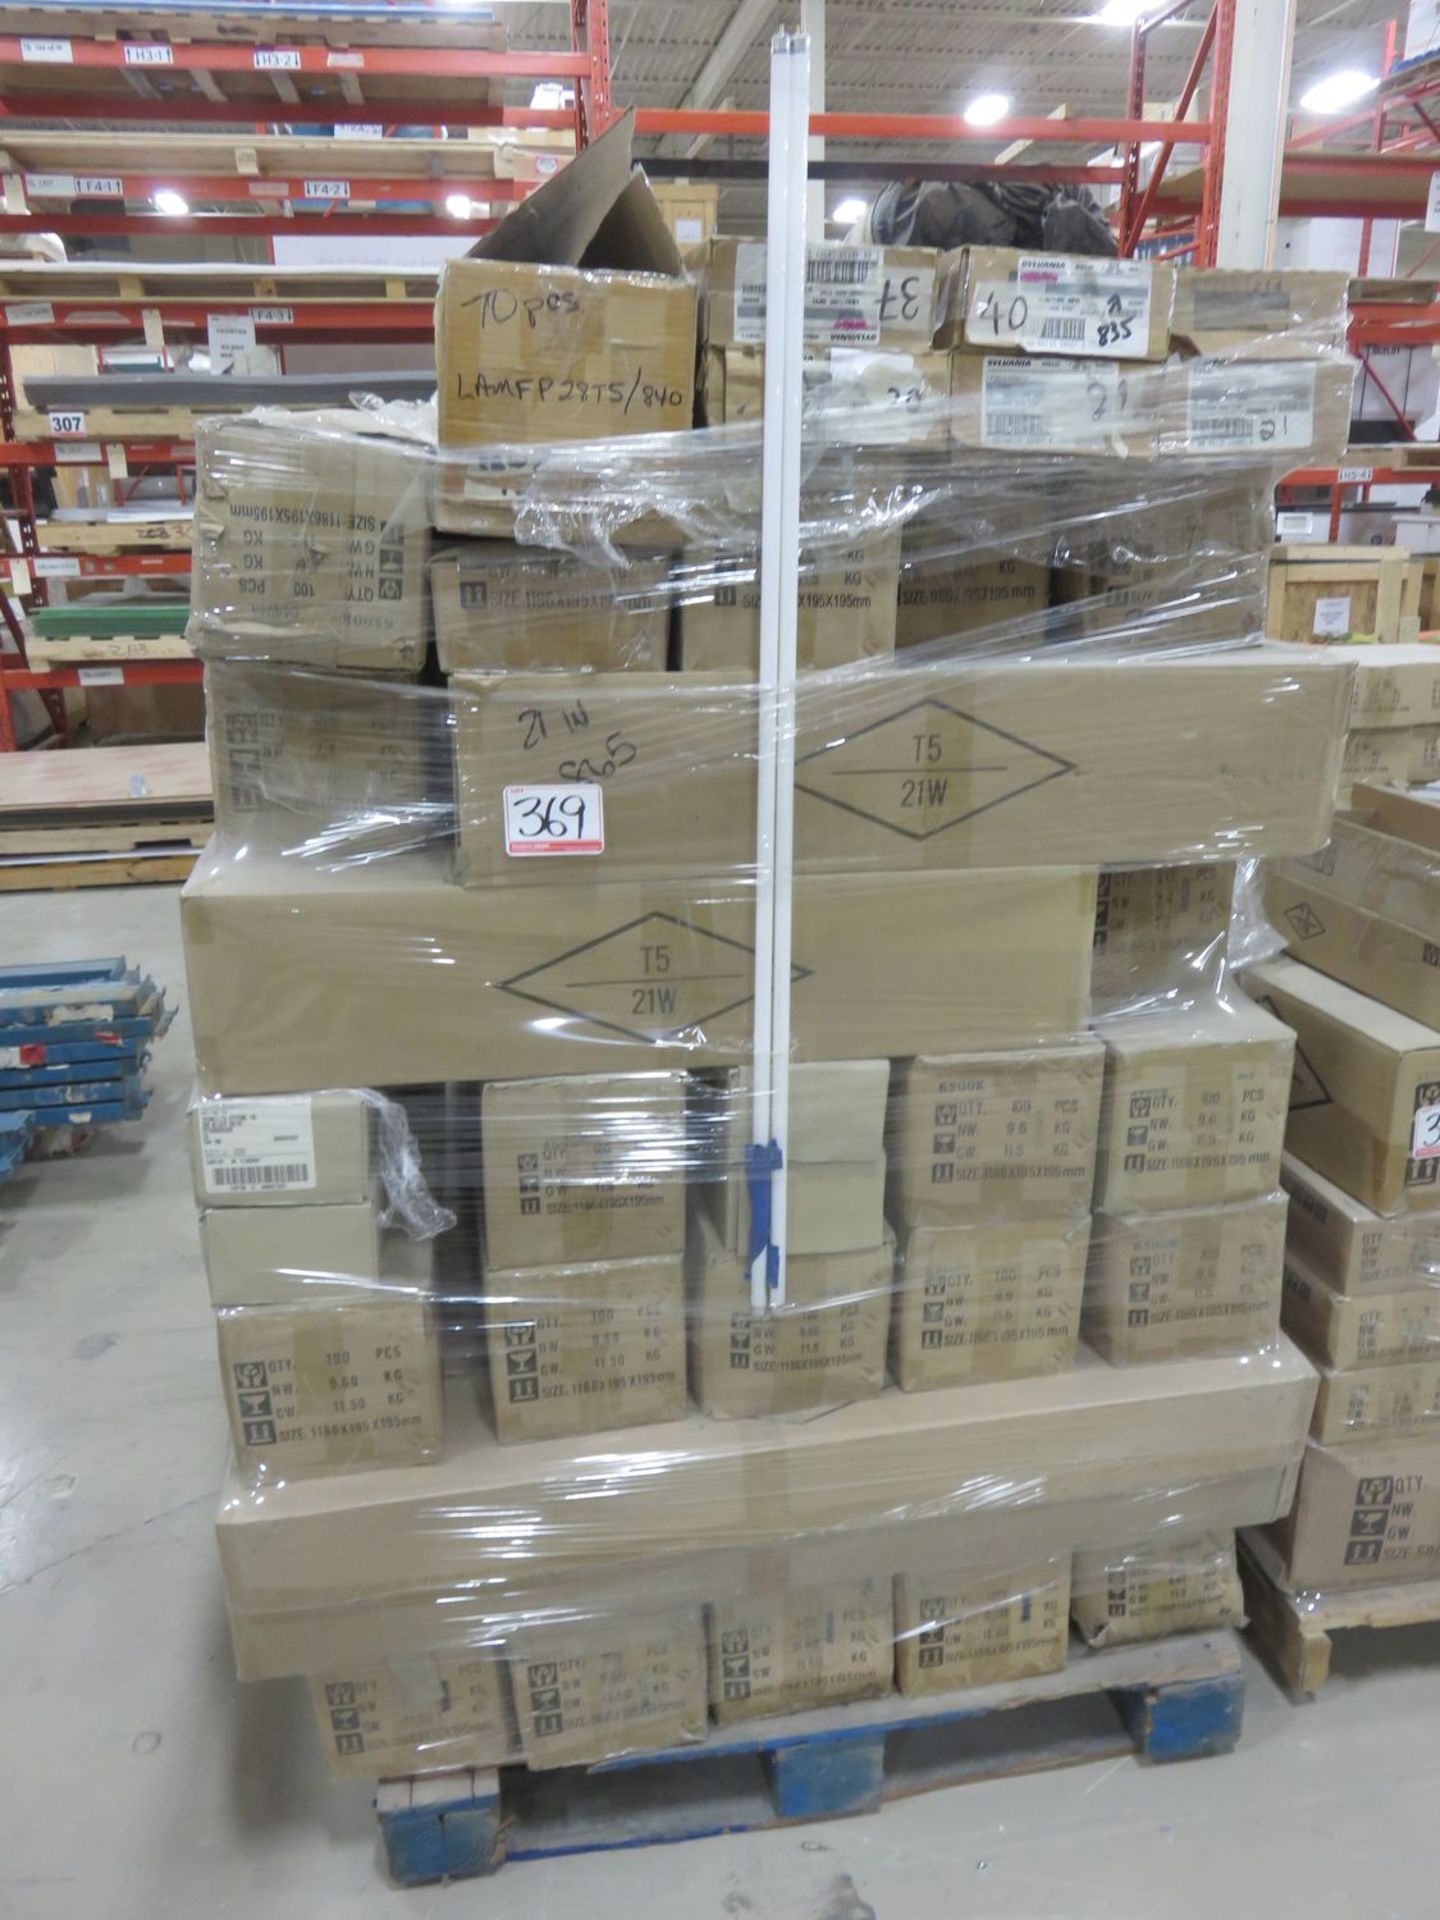 LOT - ASSORTED FLOURESCENT BULBS - (17 BOXES) #6500, (4 BOXES) PHILIPS MASTER TSL HE28W/865, &